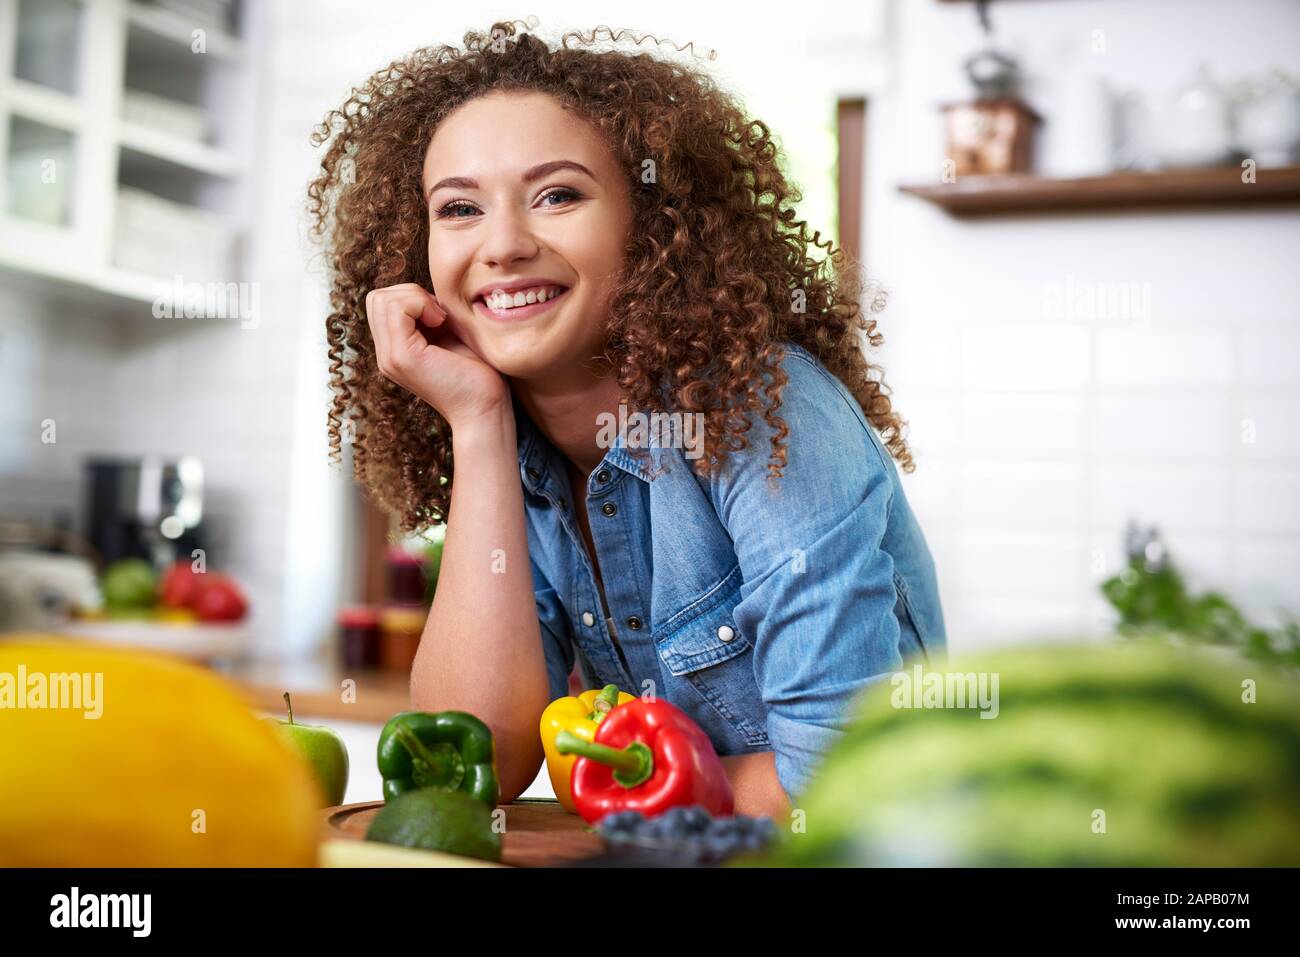 Portrait of young woman in domestic kitchen Stock Photo